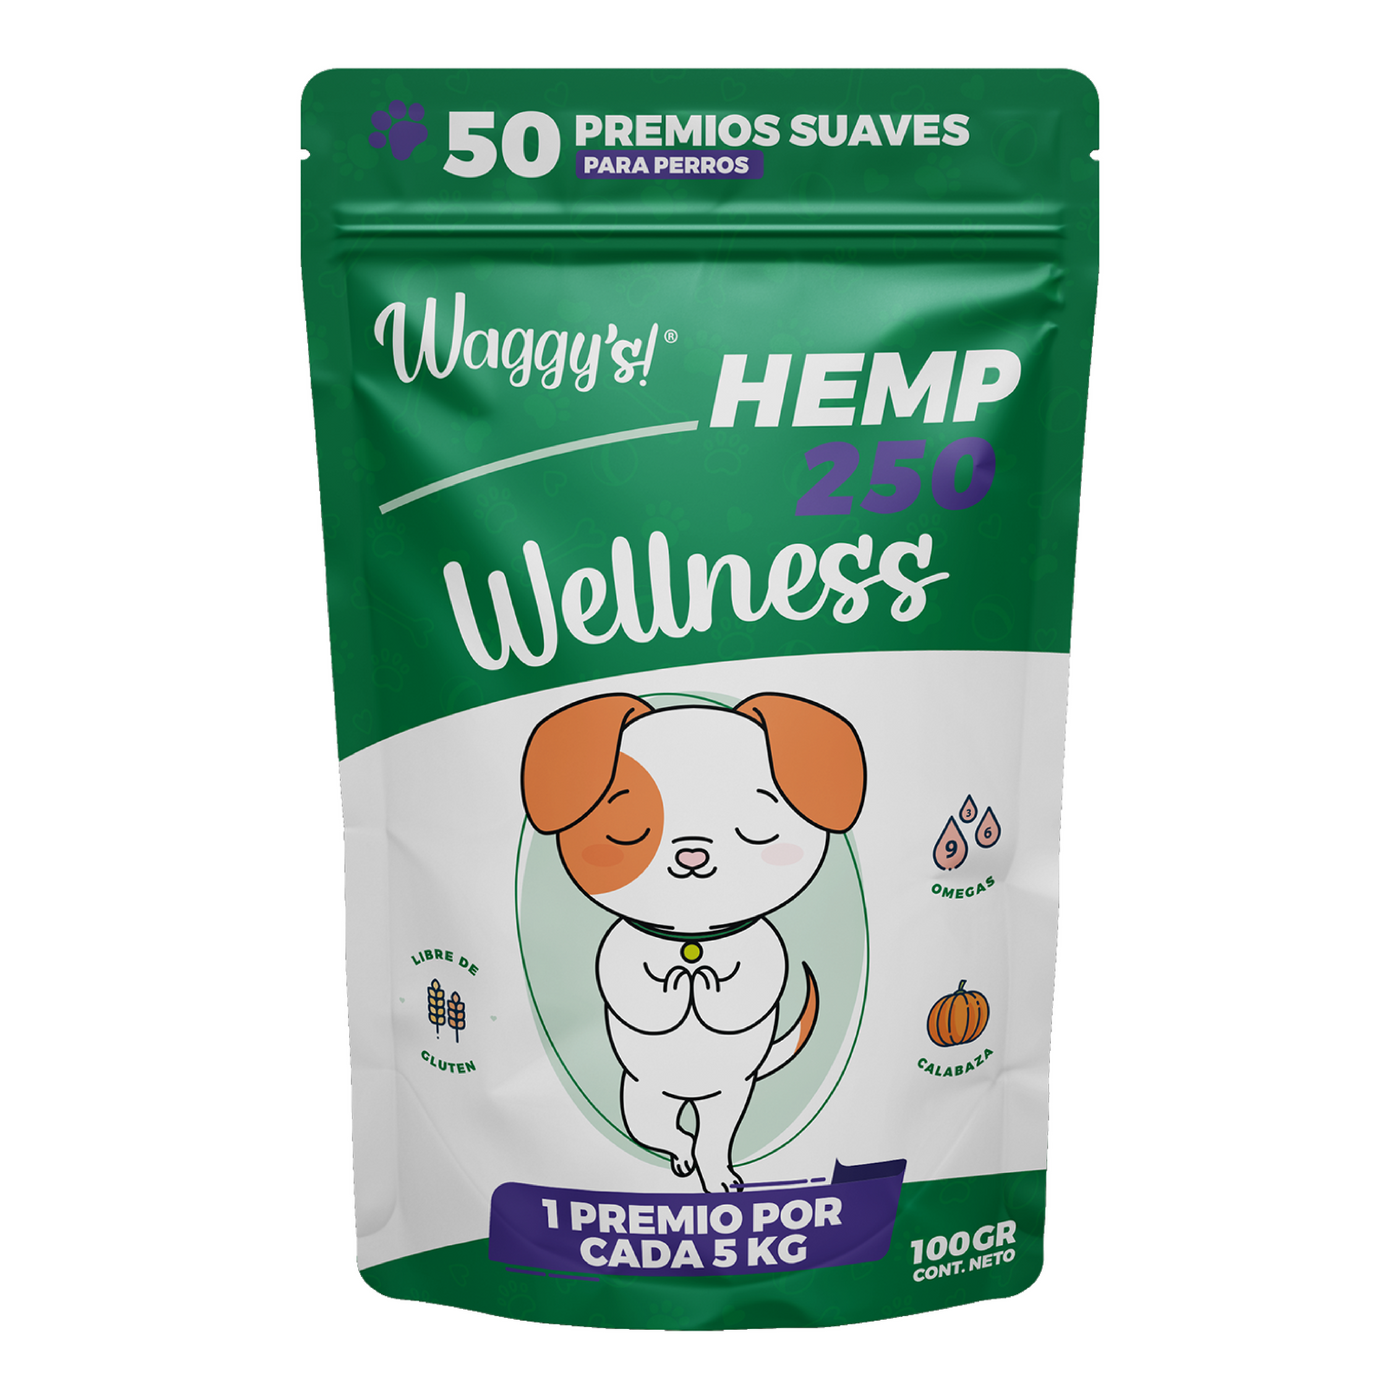 Waggy's® Wellness Perros